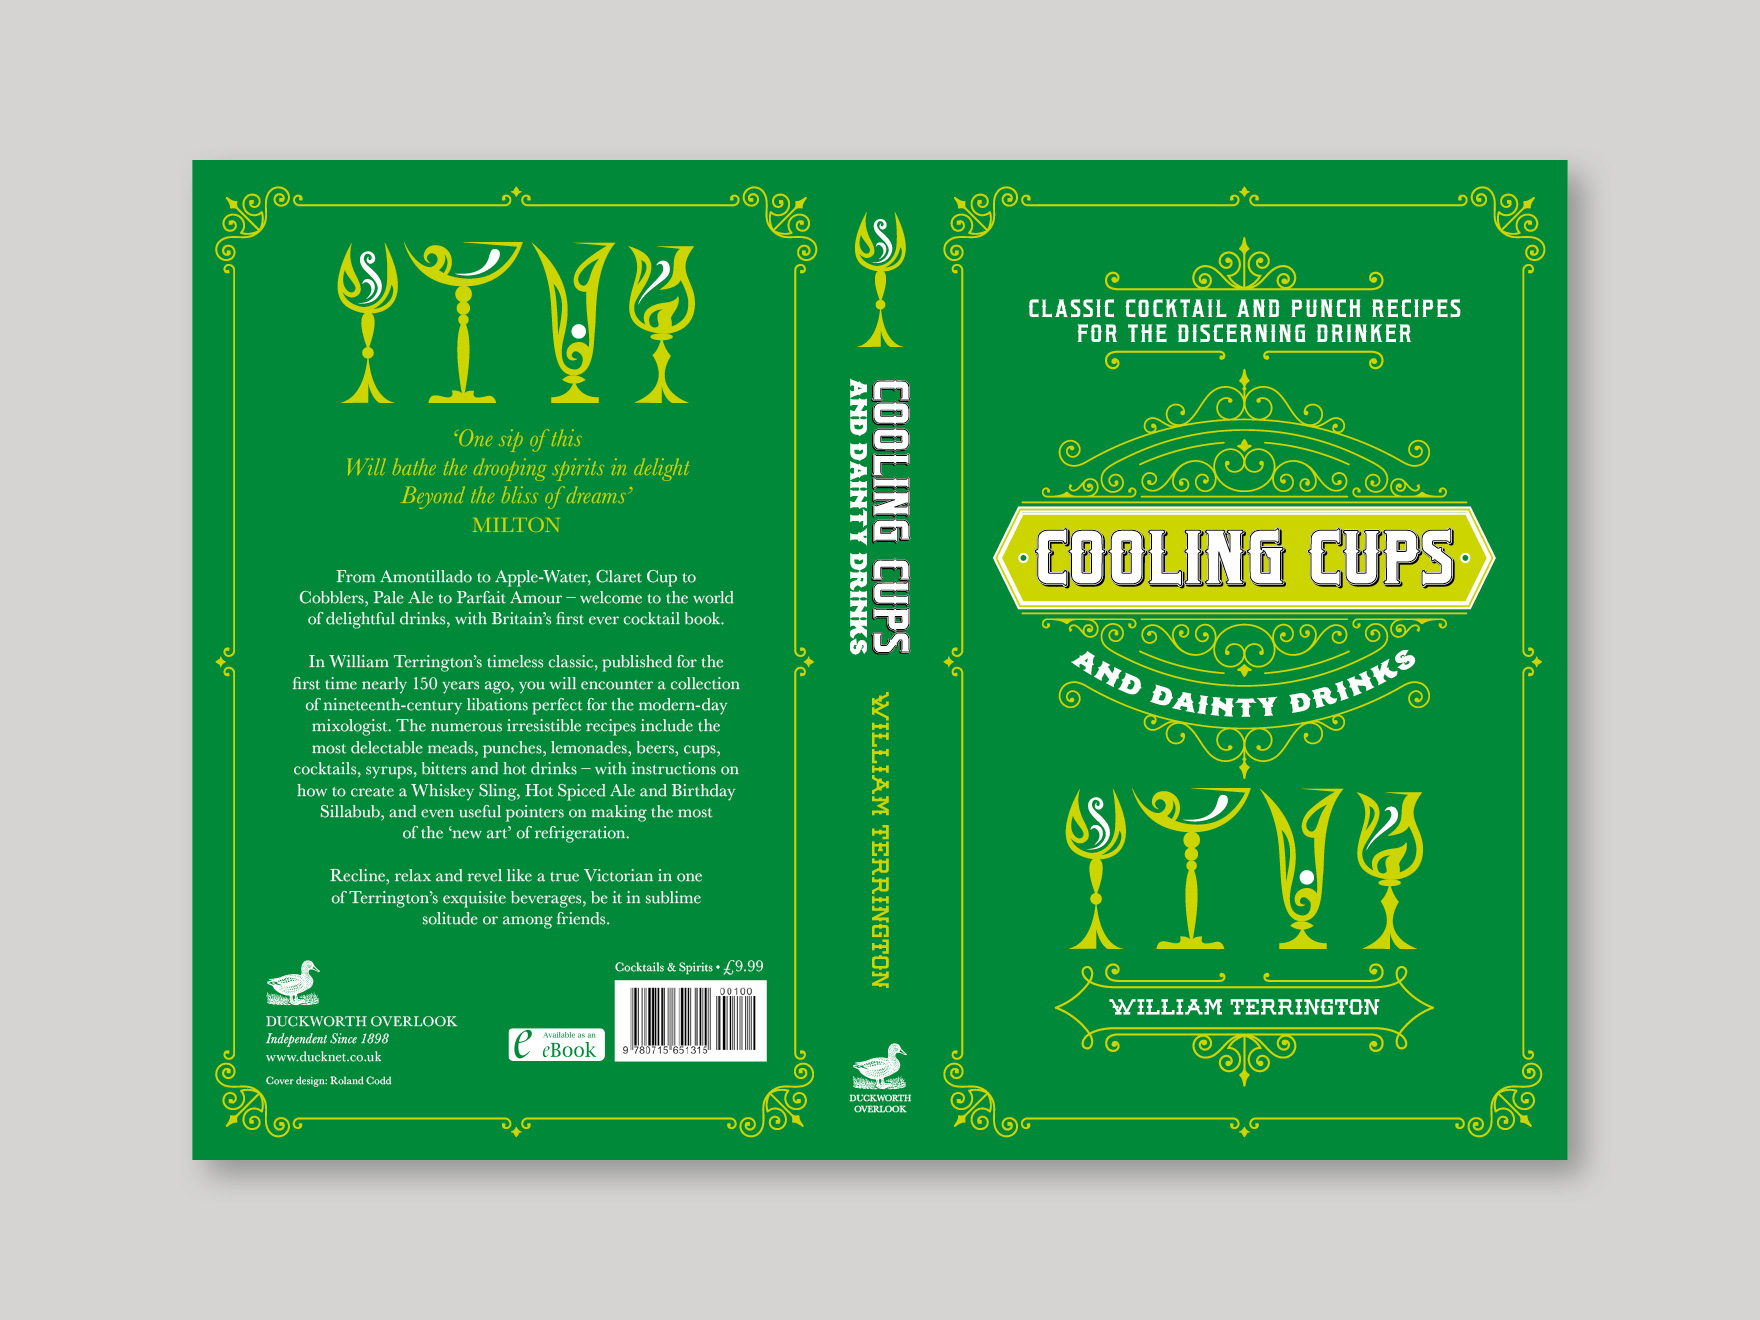 Full book cover to Cooling Cups and Dainty Drinks, showing the front, spine and back covers